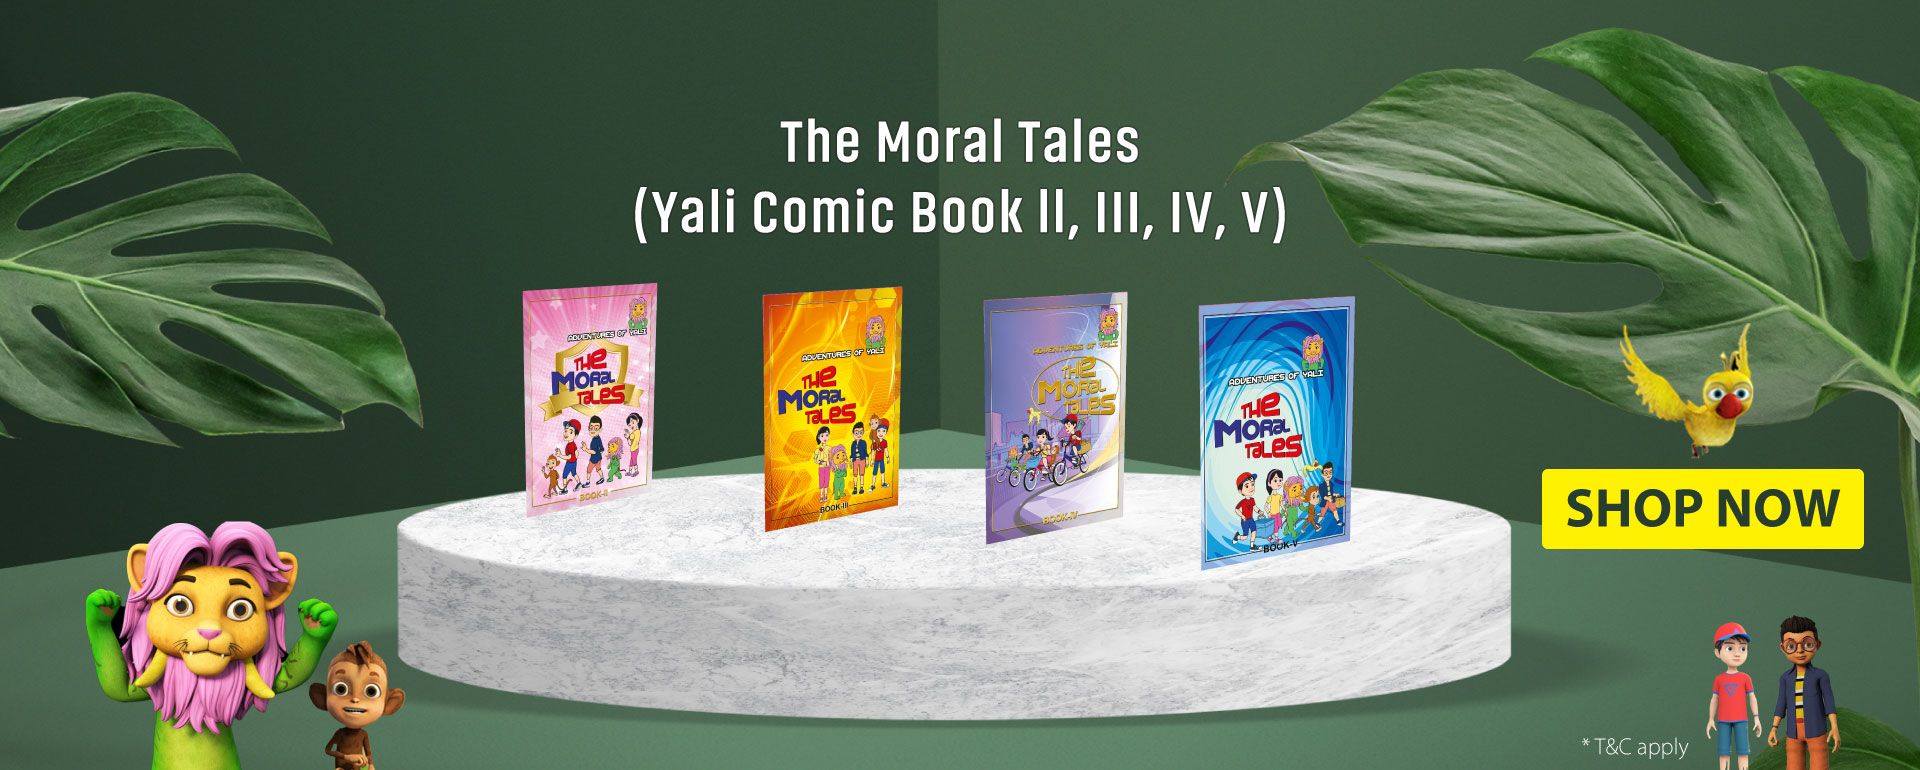 The Moral Tales